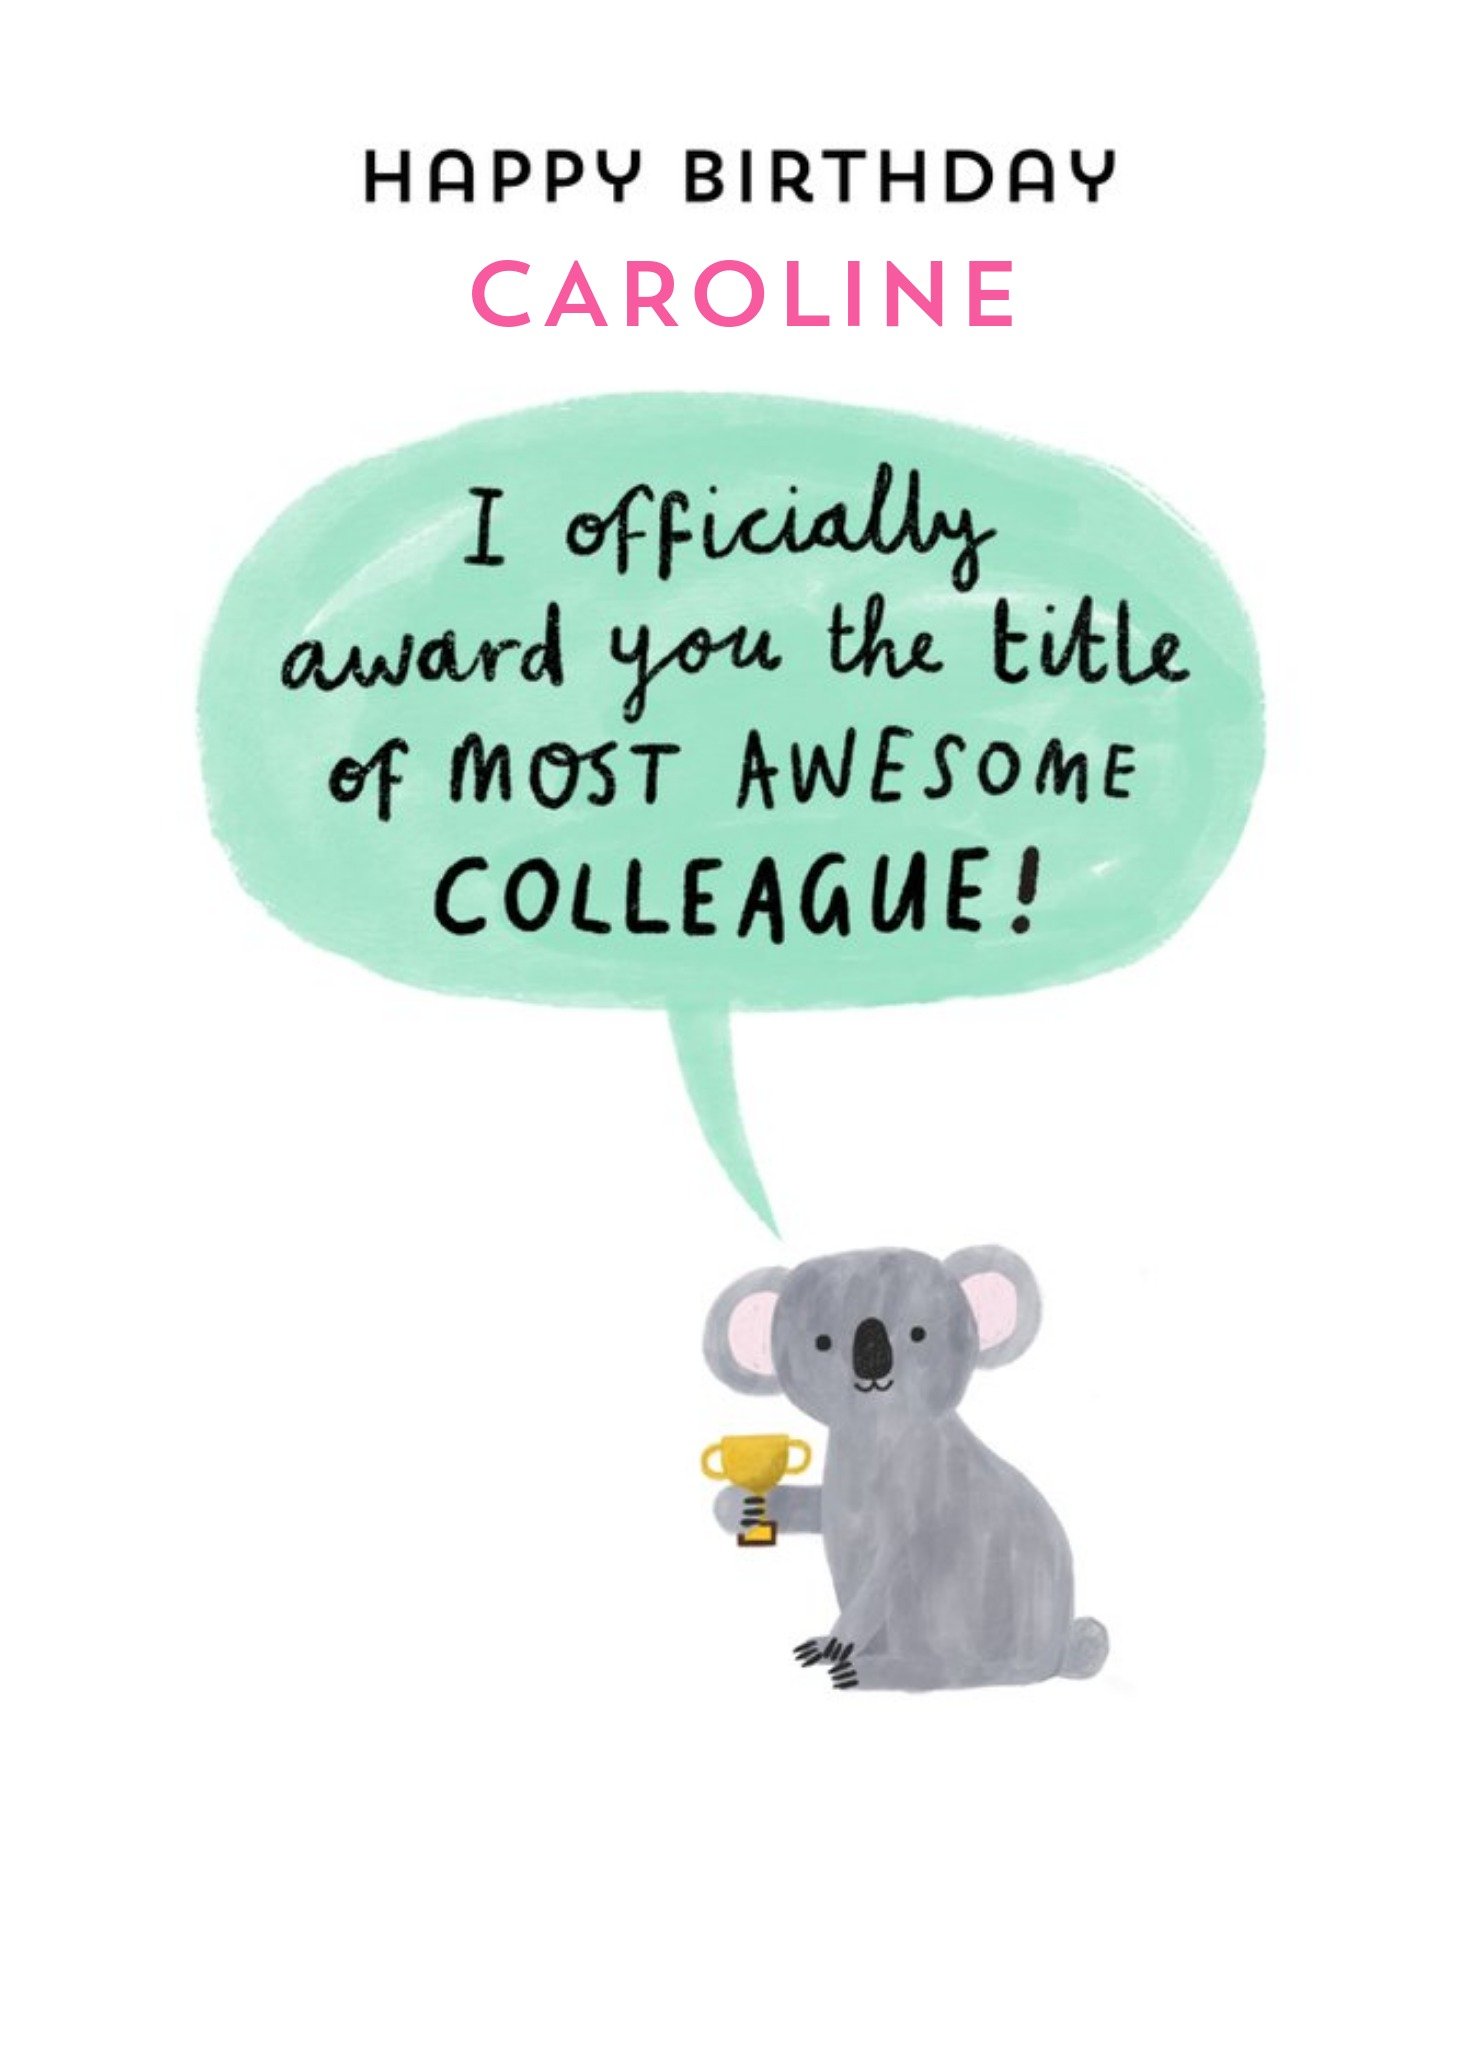 Moonpig Illustration Of A Koala Bear Holding A Trophy Most Awesome Colleague Card, Large